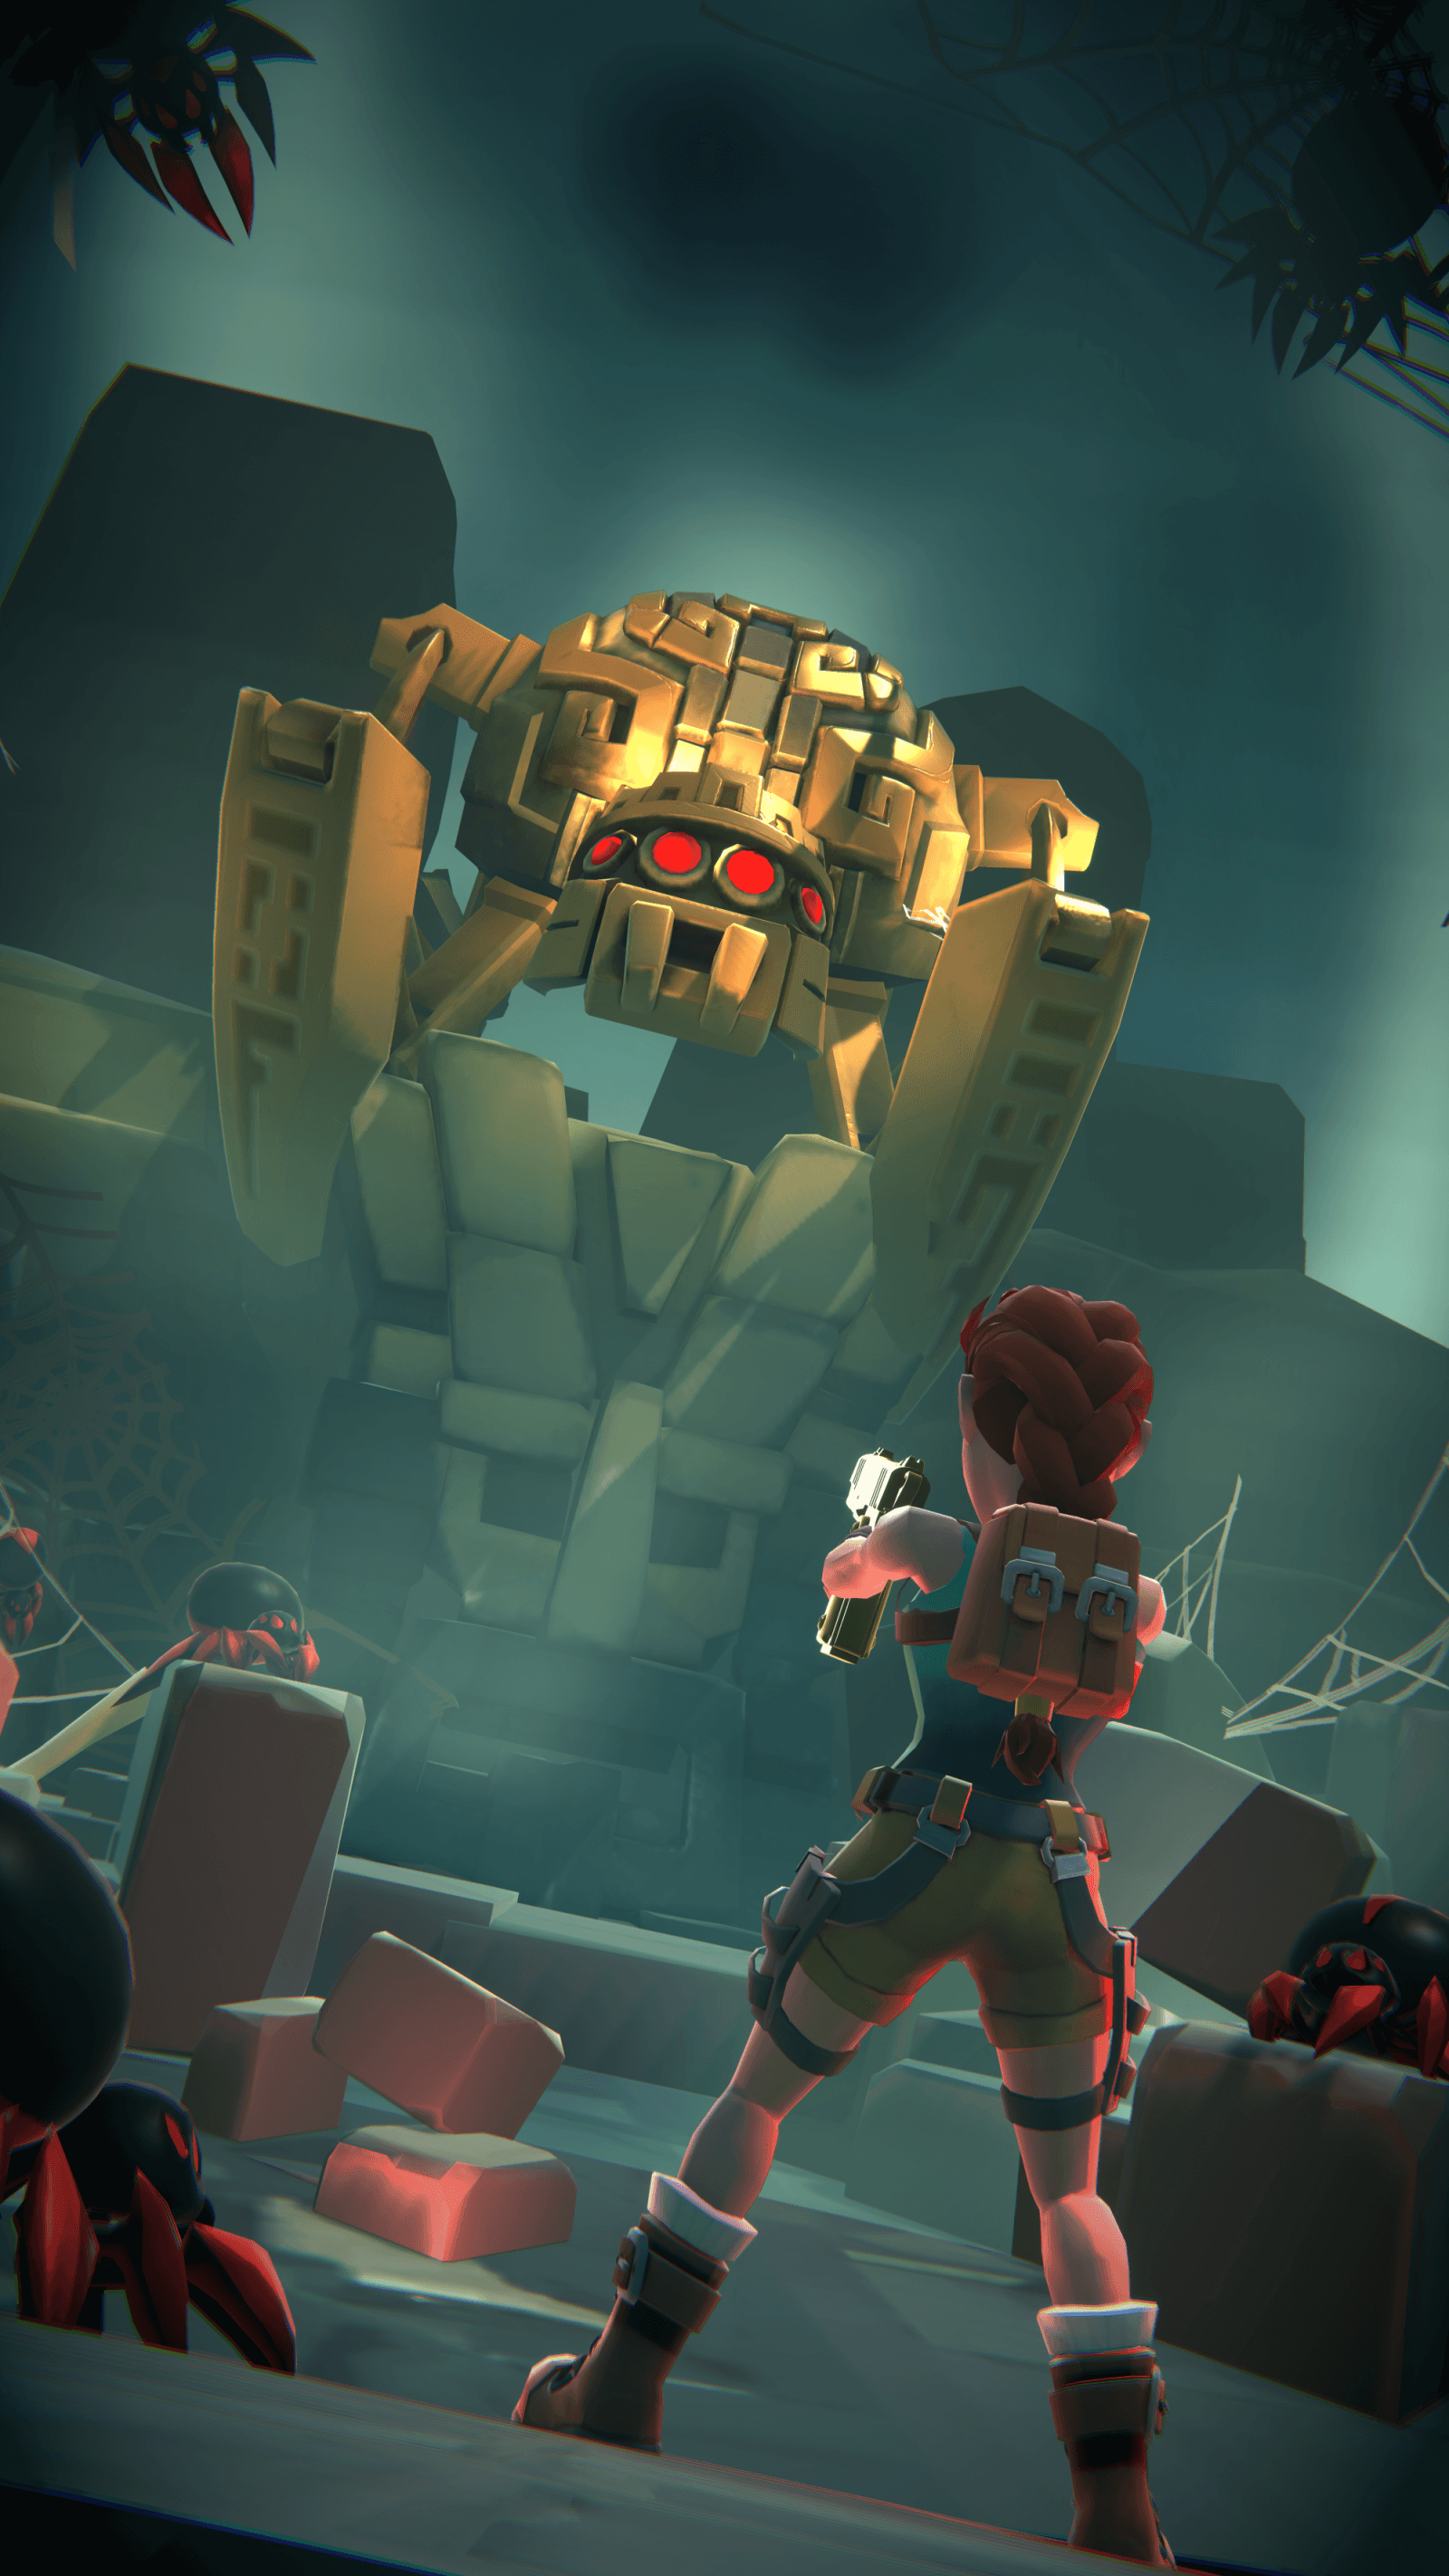 A character with a distinct hairstyle stands defiantly in front of a giant robotic spider in an ominous cave setting.